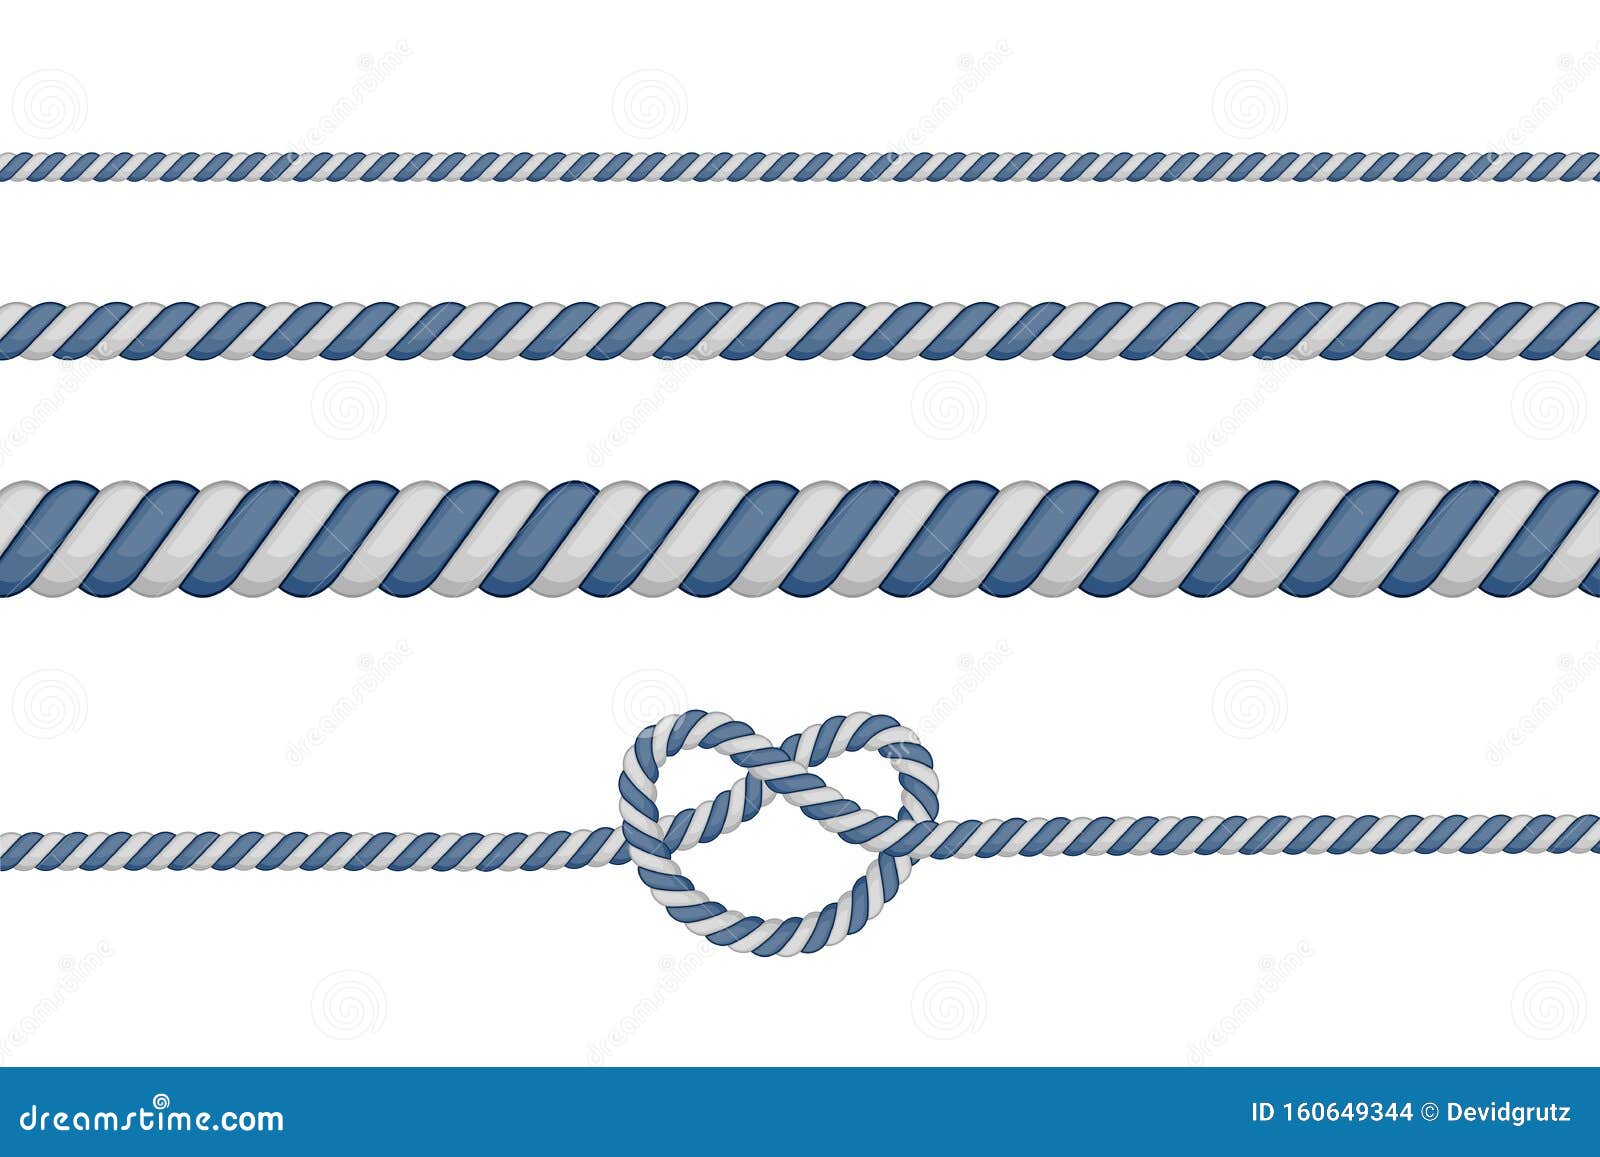 Set of Different Thickness Ropes Isolated on White. Vector Illustration ...